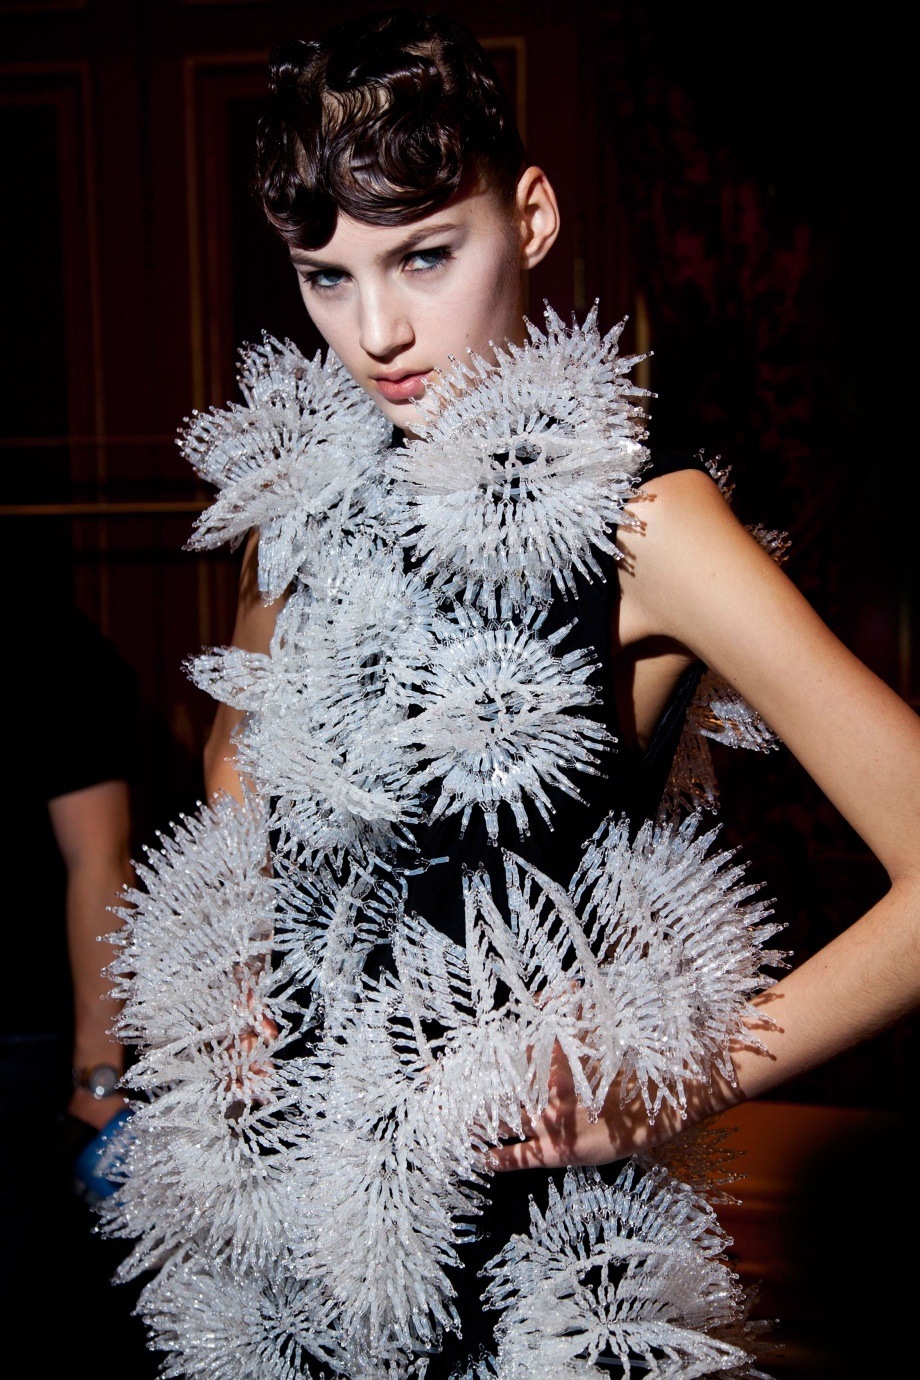 A New Twist On Fashion with Stratasys 3D Printing